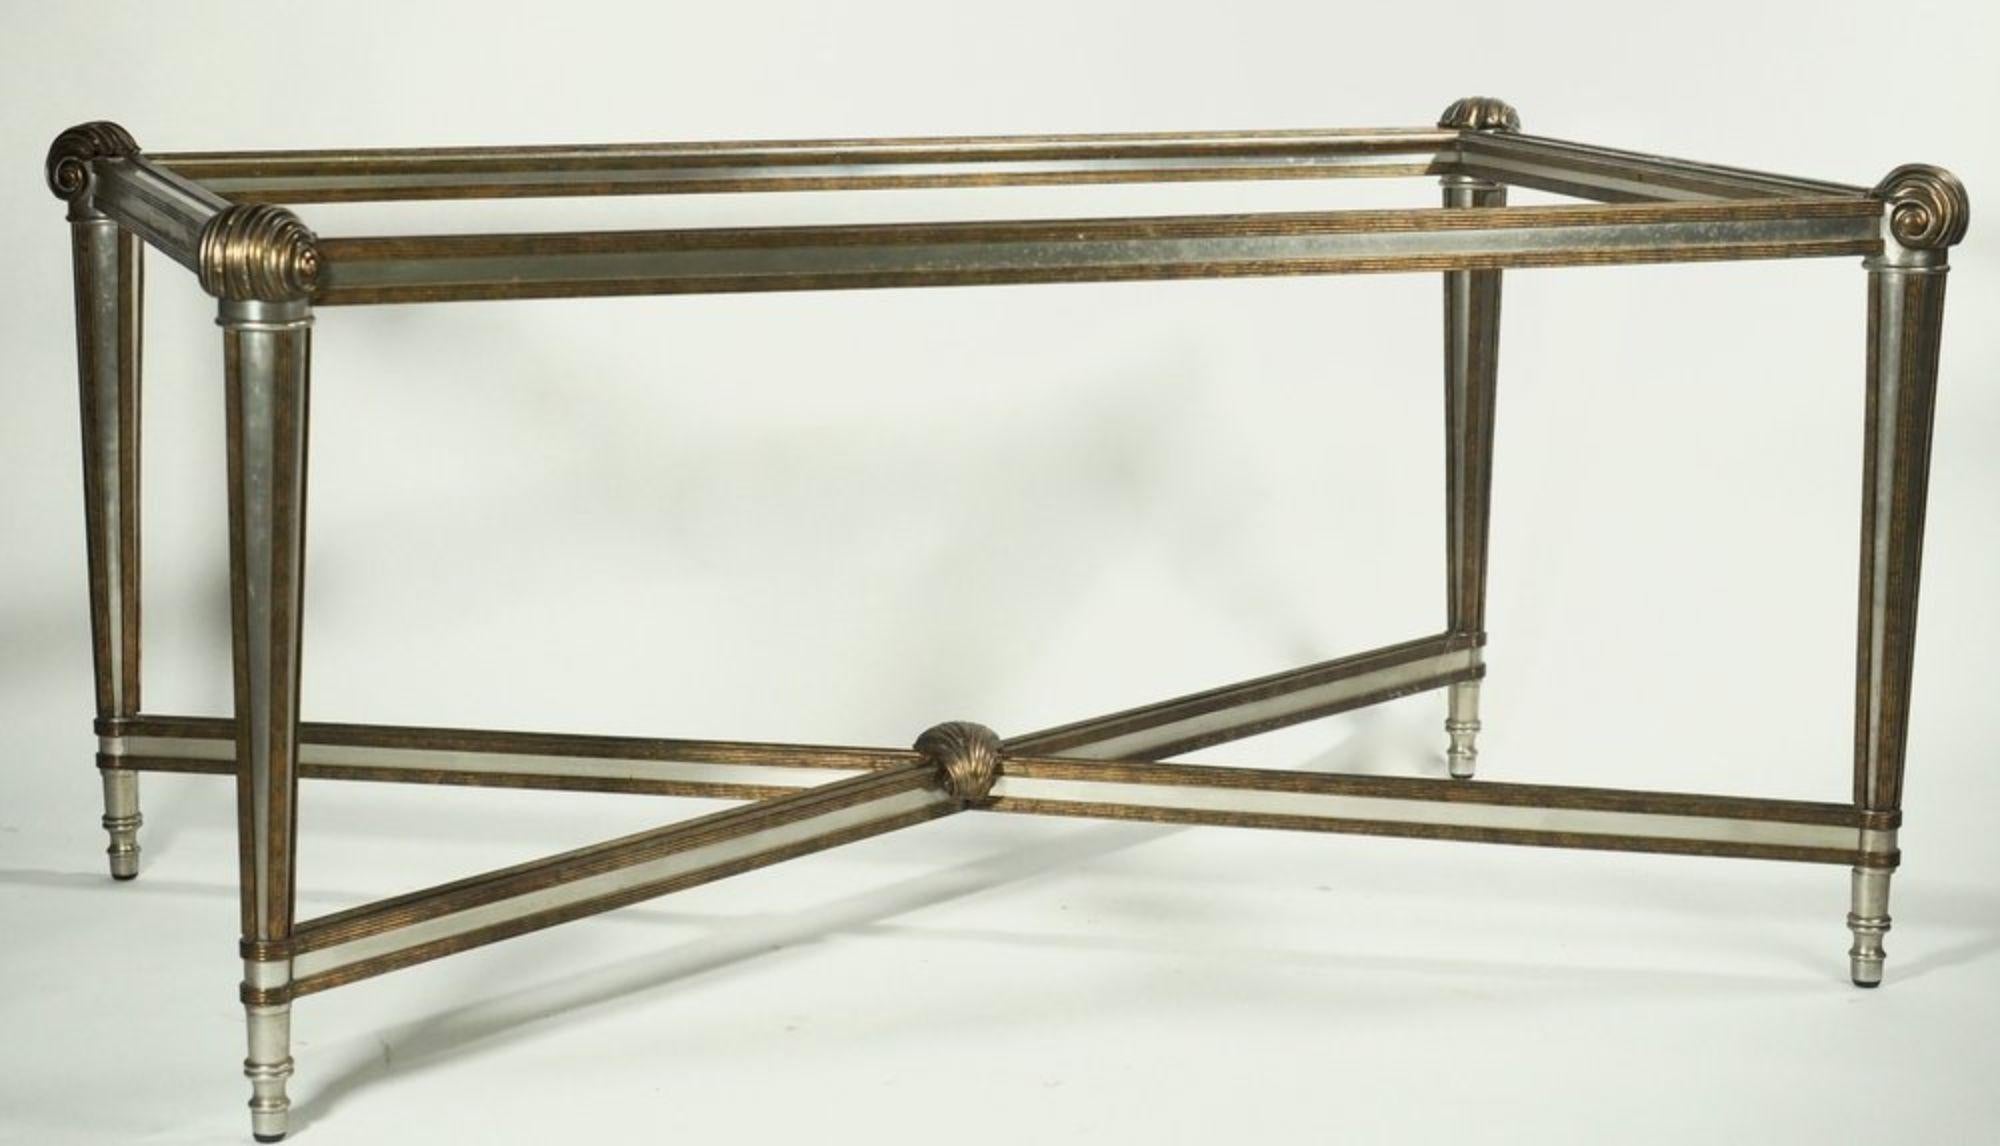 Mid-Century Modern coffee/center/sofa table by Labarge in bronze and steel. 52” wide x 32” deep x 25” high. Takes a glass top.